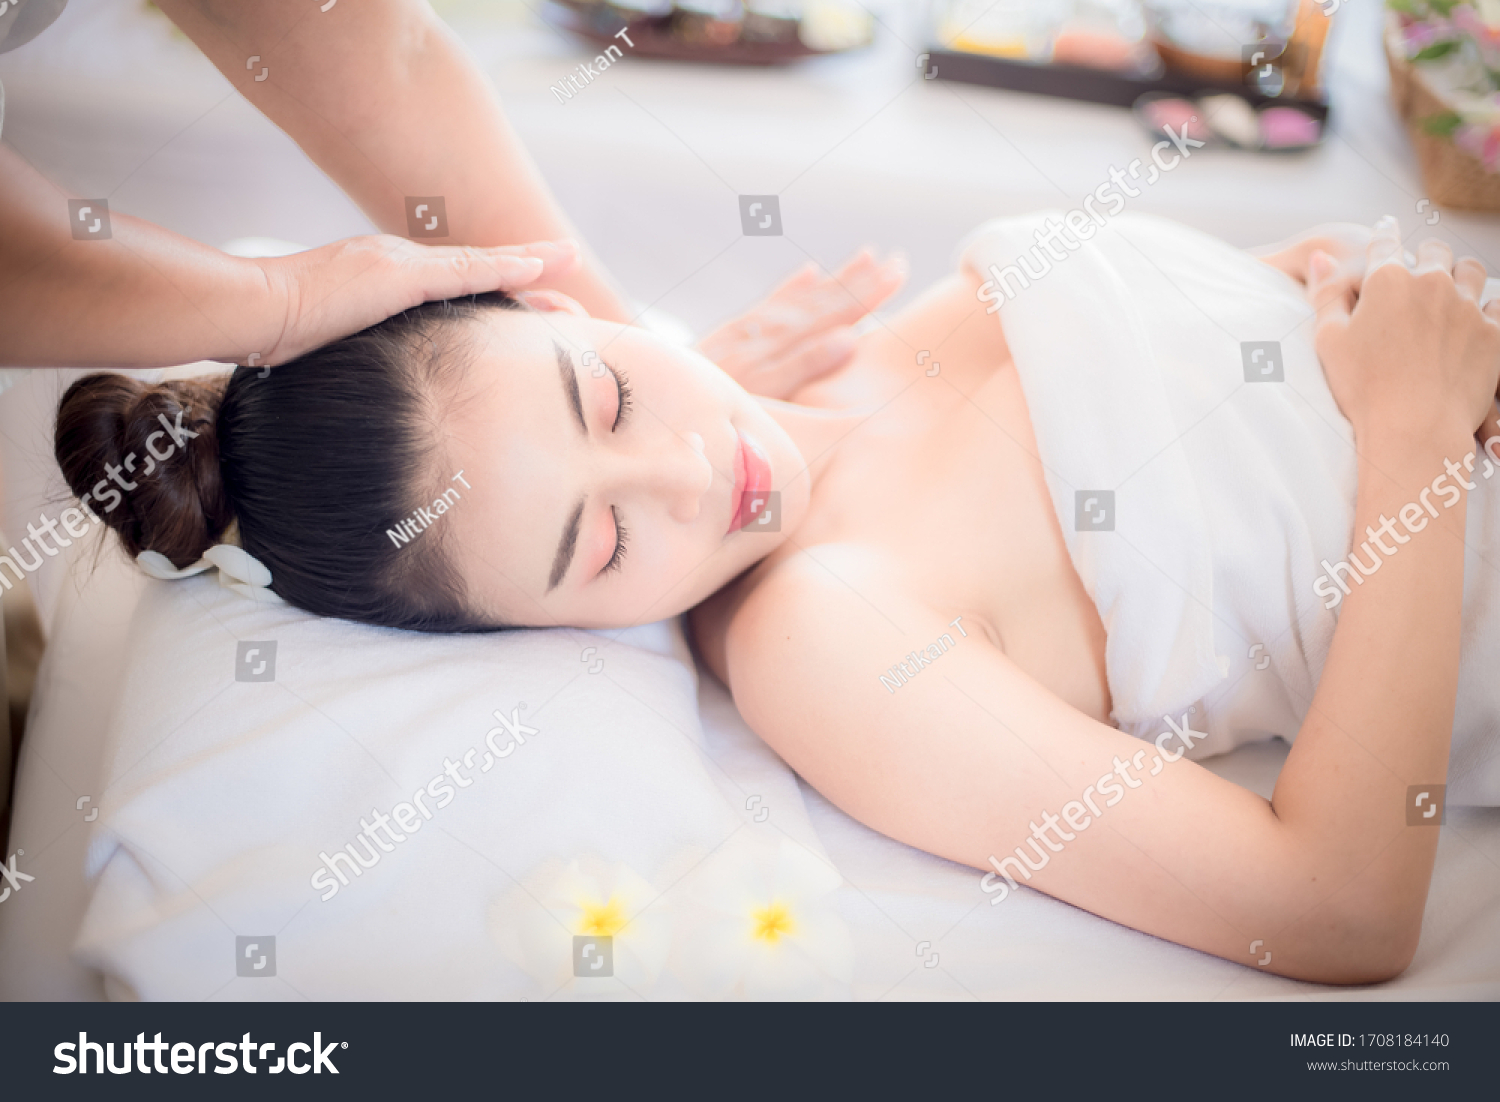 andrew suzanne share full body massage asian photos